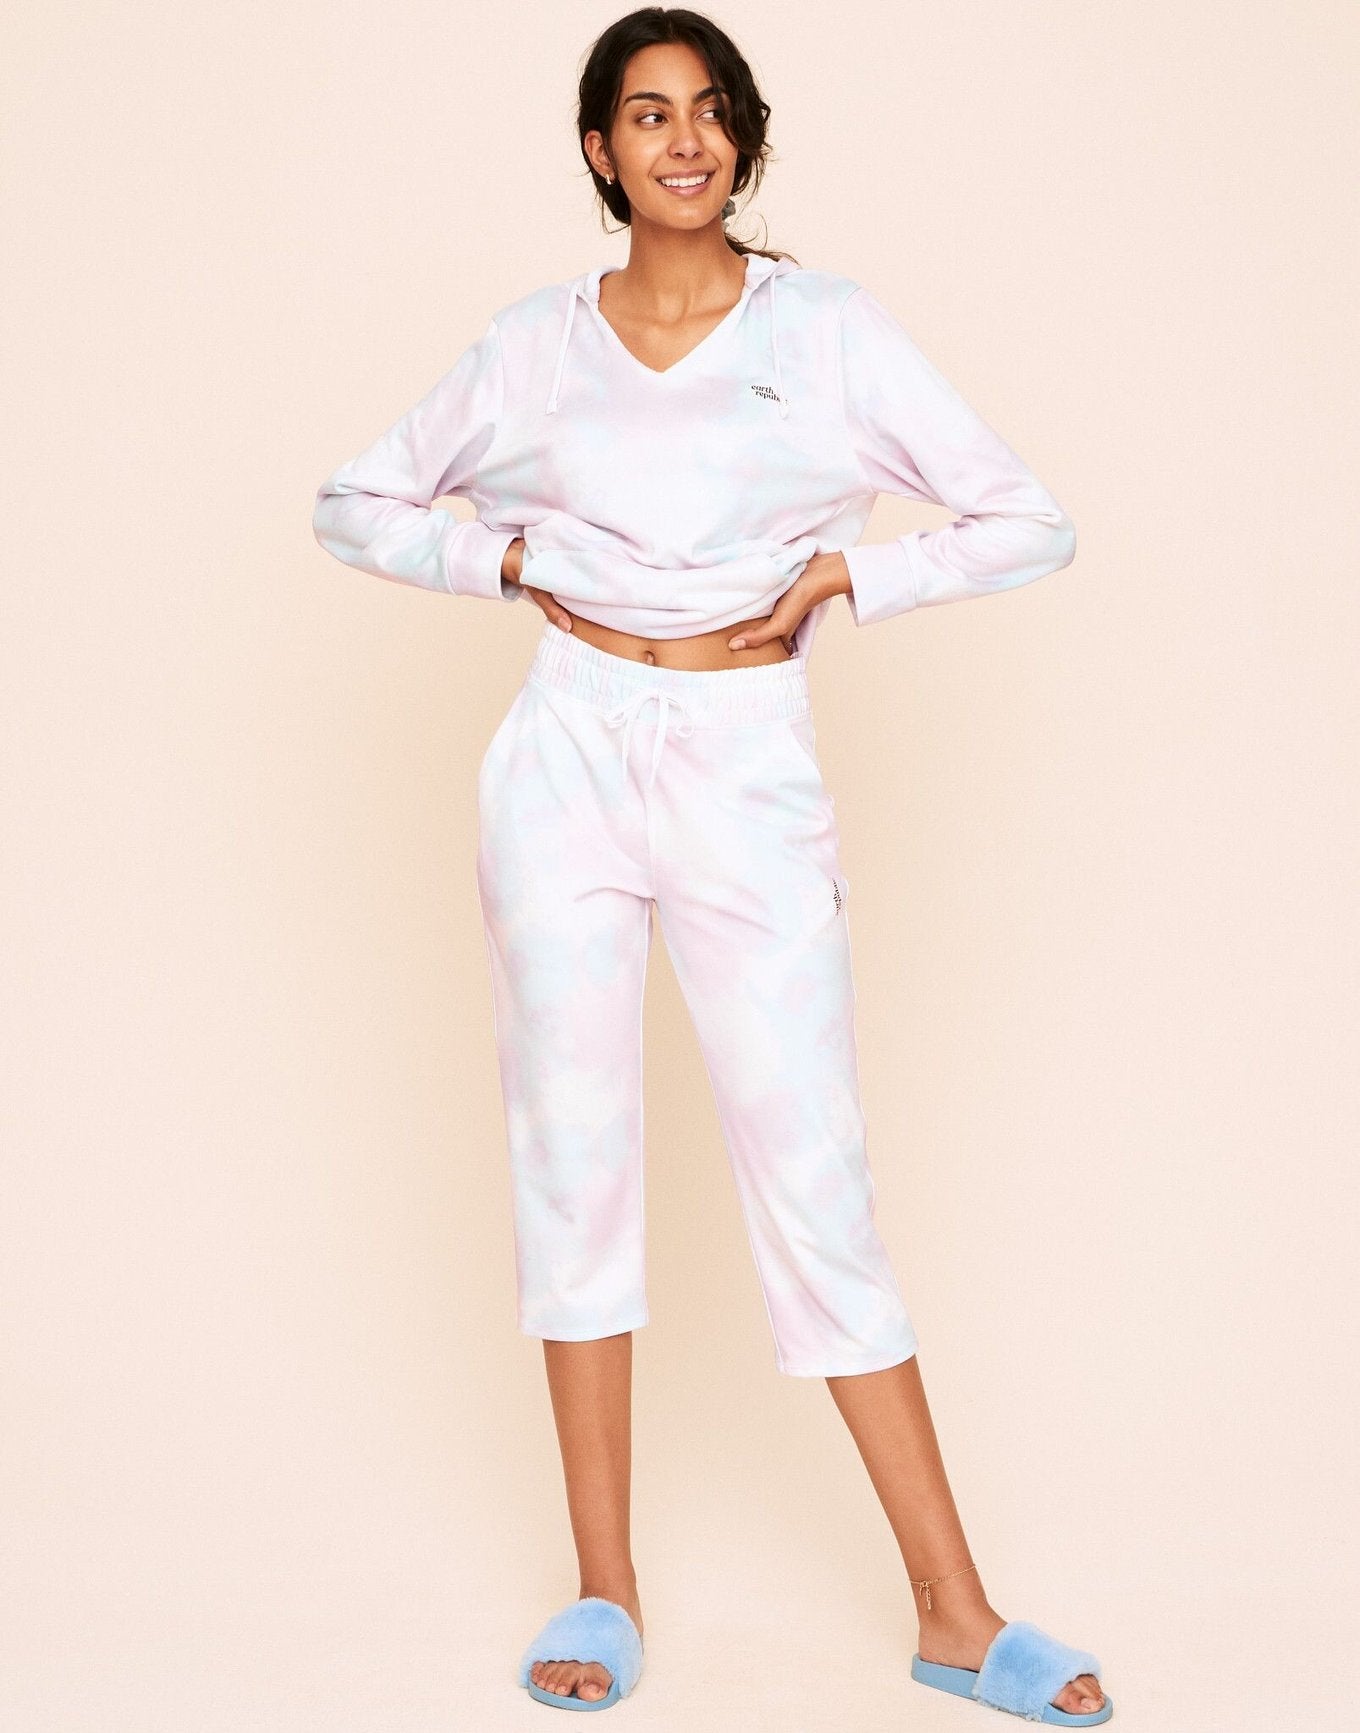 Earth Republic Jaelyn Cropped Pant Cropped Pant in color Tie Dye (Athleisure Print 2) and shape pant